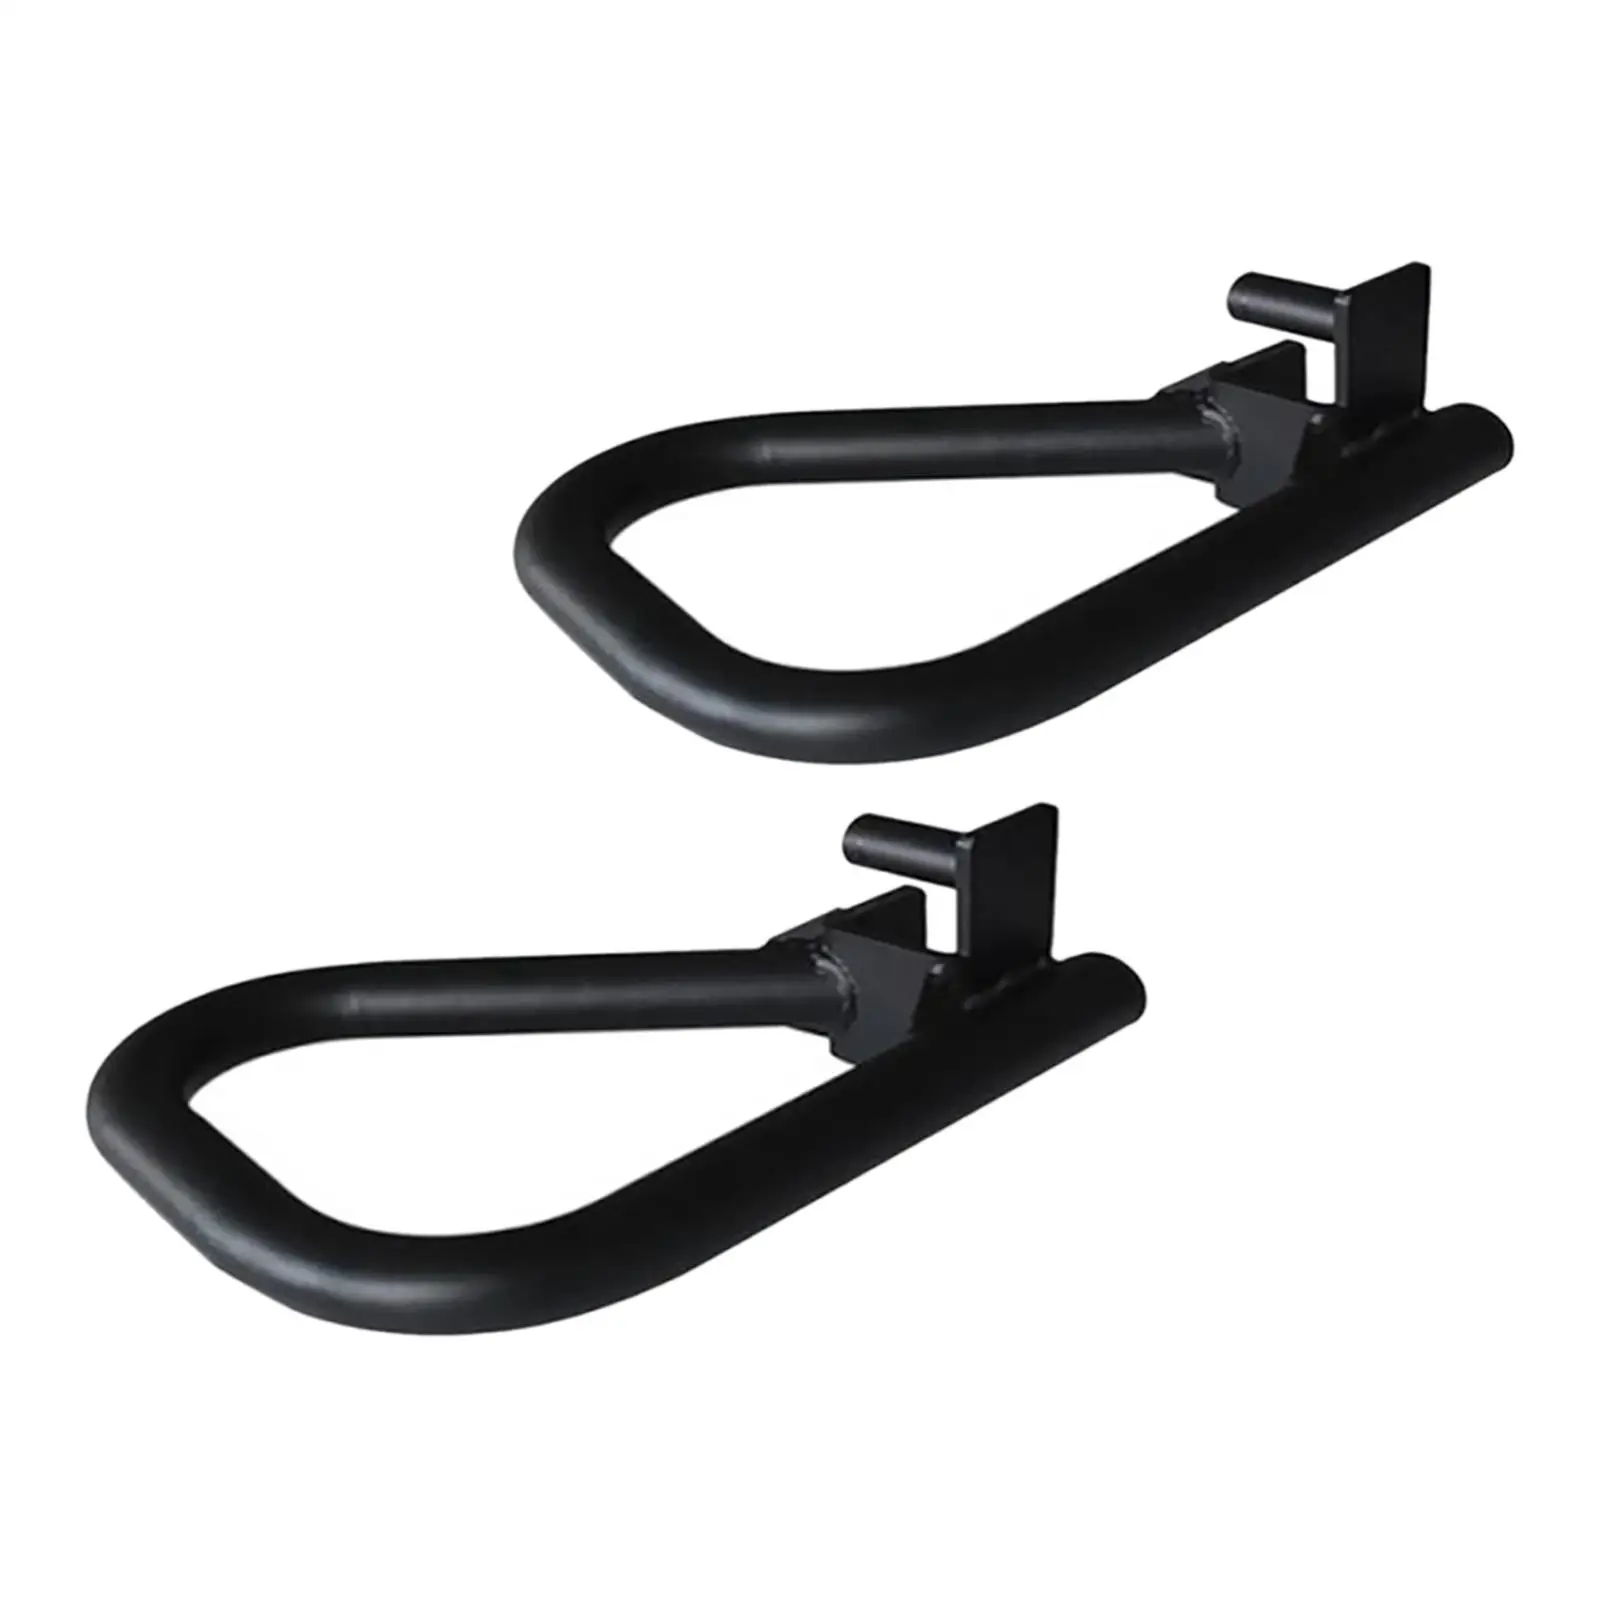 2 Dip Bar Attachments Exercising Barbell Rack Holders for 2